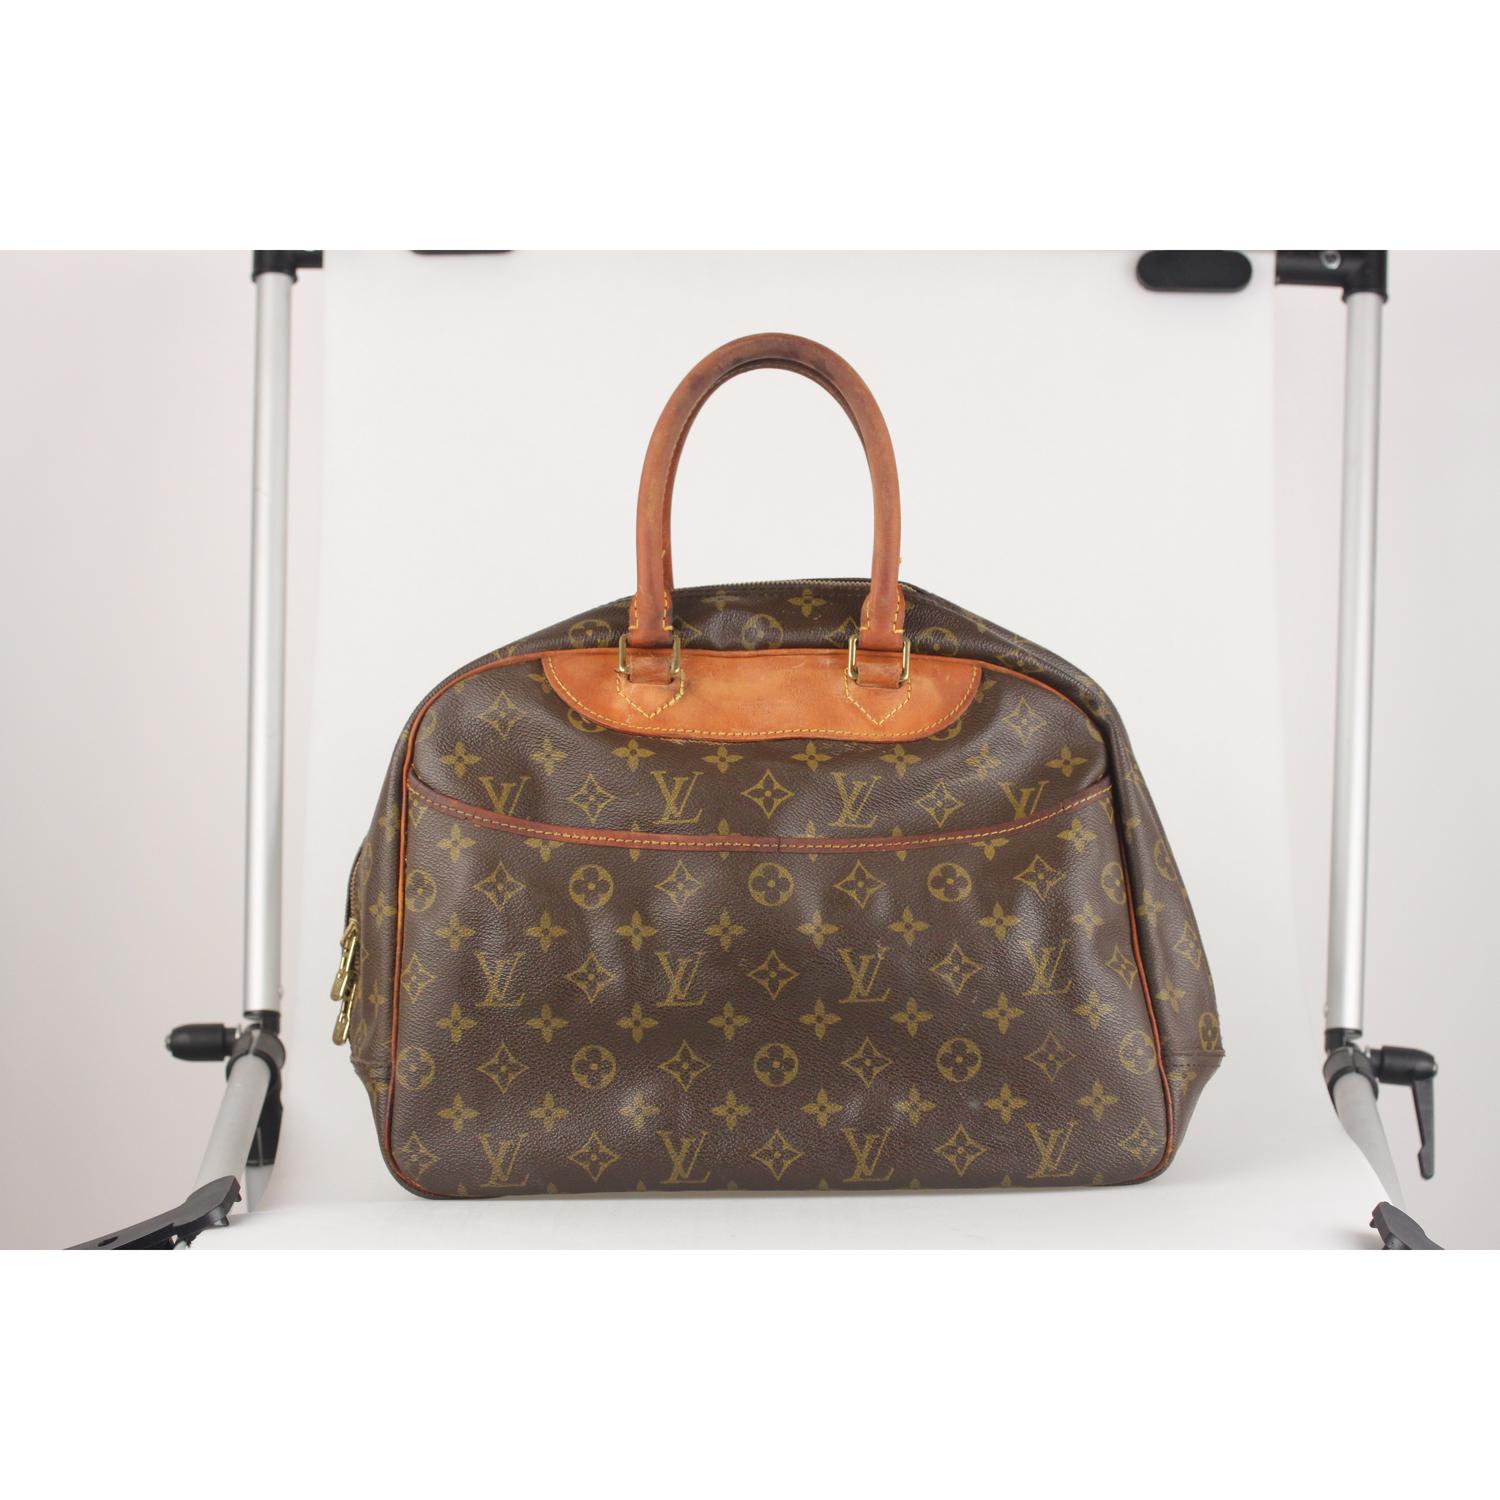 Vintage Louis Vuitton DEAUVILLE Bag crafted in timeless monogram canvas with genuine leather trim and handles. Upper zipper closure. Two exterior open pockets. Beige washable lining with 4 open pockets, 1 elastic strap to hold bottles and cosmetics